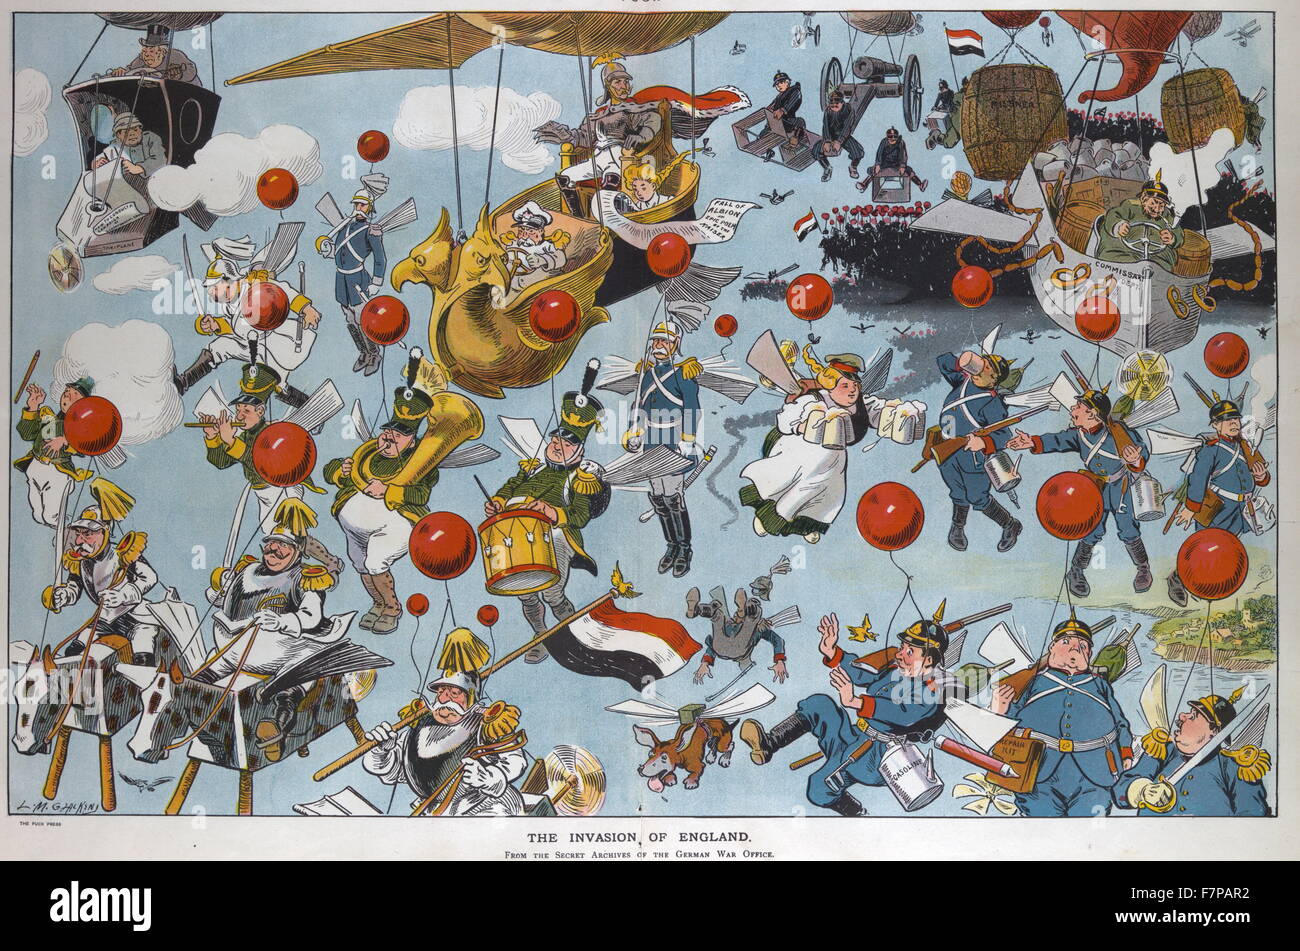 The invasion of England by Louis M. Glackens (1866-1933). Photomechanical print : offset, colour. Illustration shows German soldiers and officers invading England my means of hot-air balloons and other types of airships;also shows German emperor William II dictating 'Fall of Albion an epic poem by the Kaiser' to his secretary, and war correspondent Richard Harding Davis writing 'How to Conduct a Campaign'. Stock Photo